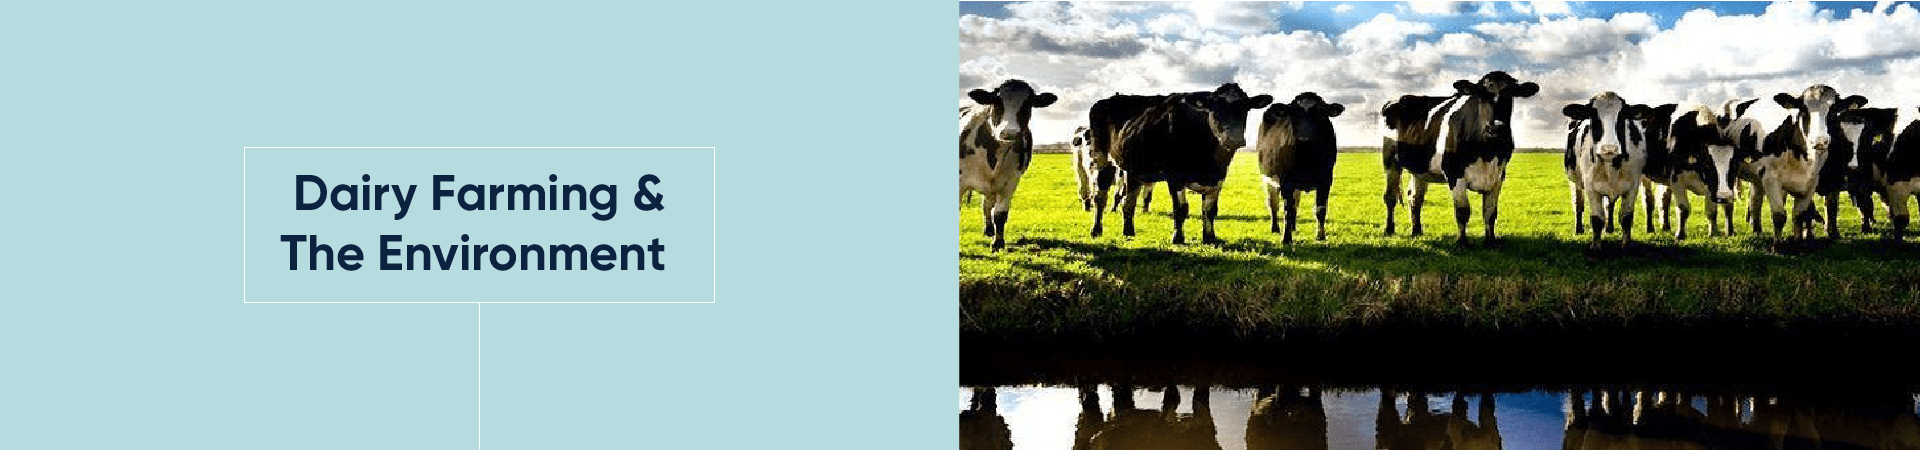 Dairy Farming and The Environment - Course Banner